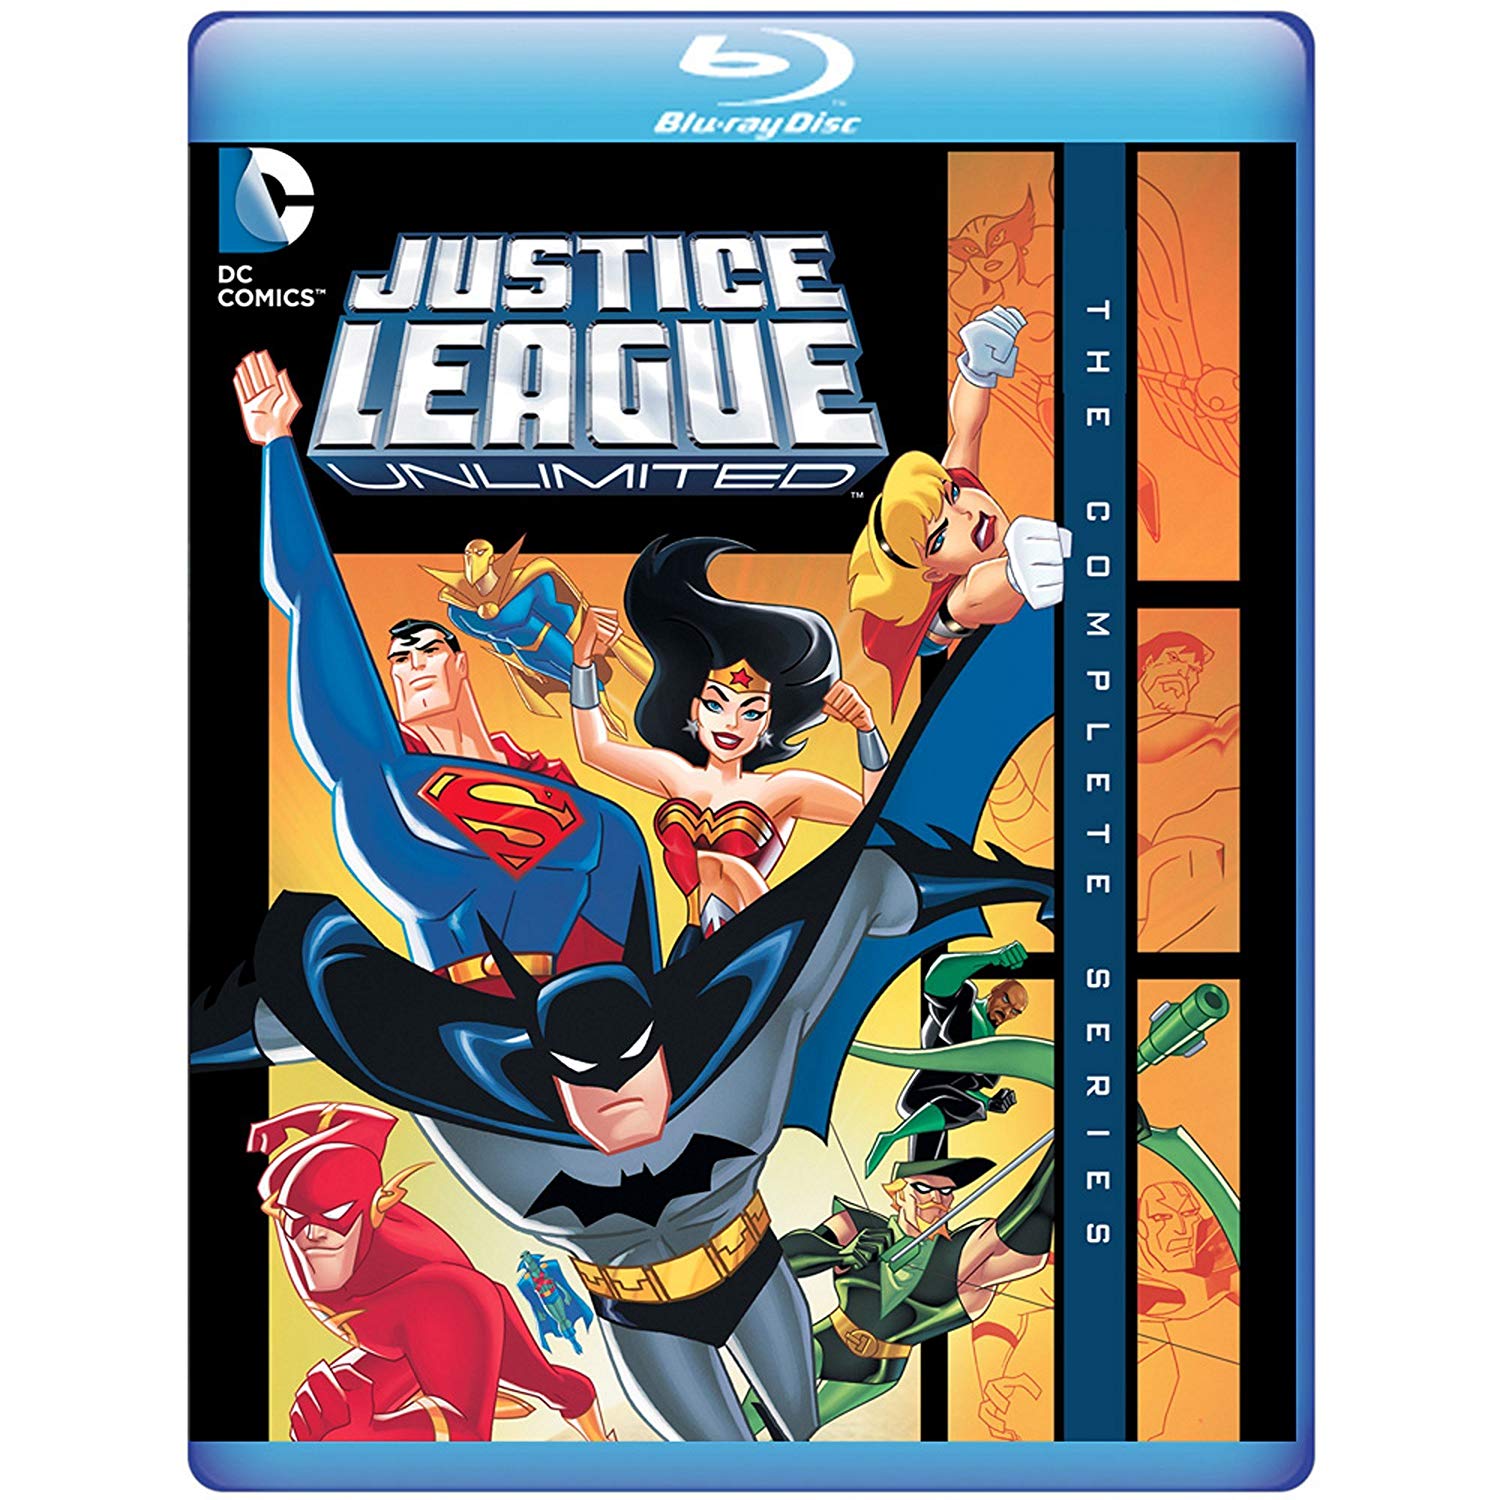 Justice League Unlimited: The Complete Series by Warner Brothers